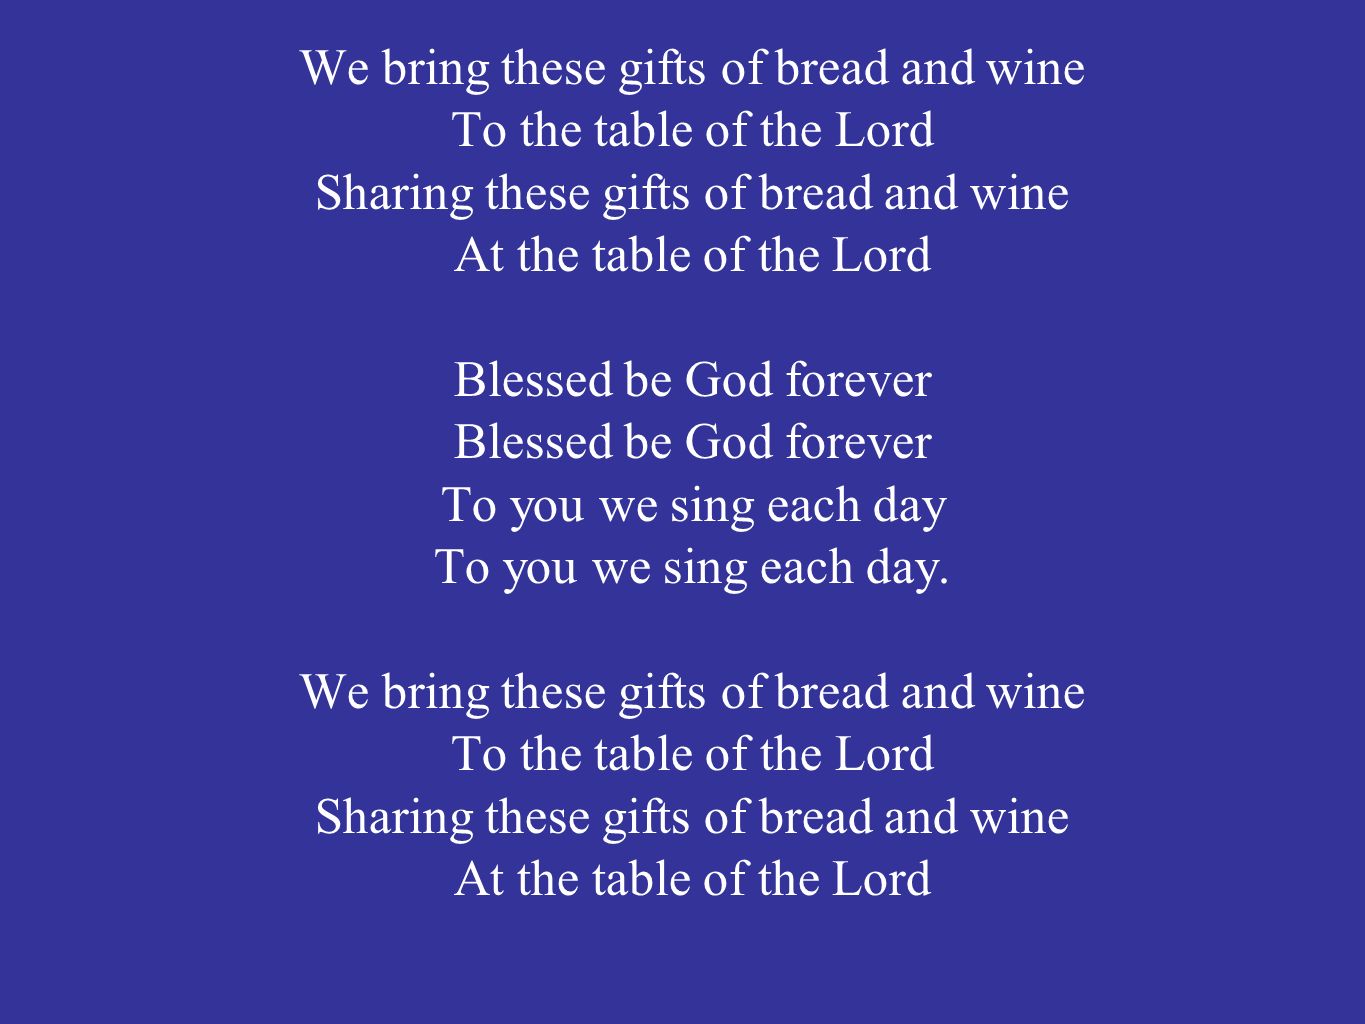 We bring these gifts of bread and wine To the table of the Lord Sharing these gifts of bread and wine At the table of the Lord Blessed be God forever To you we sing each day To you we sing each day.